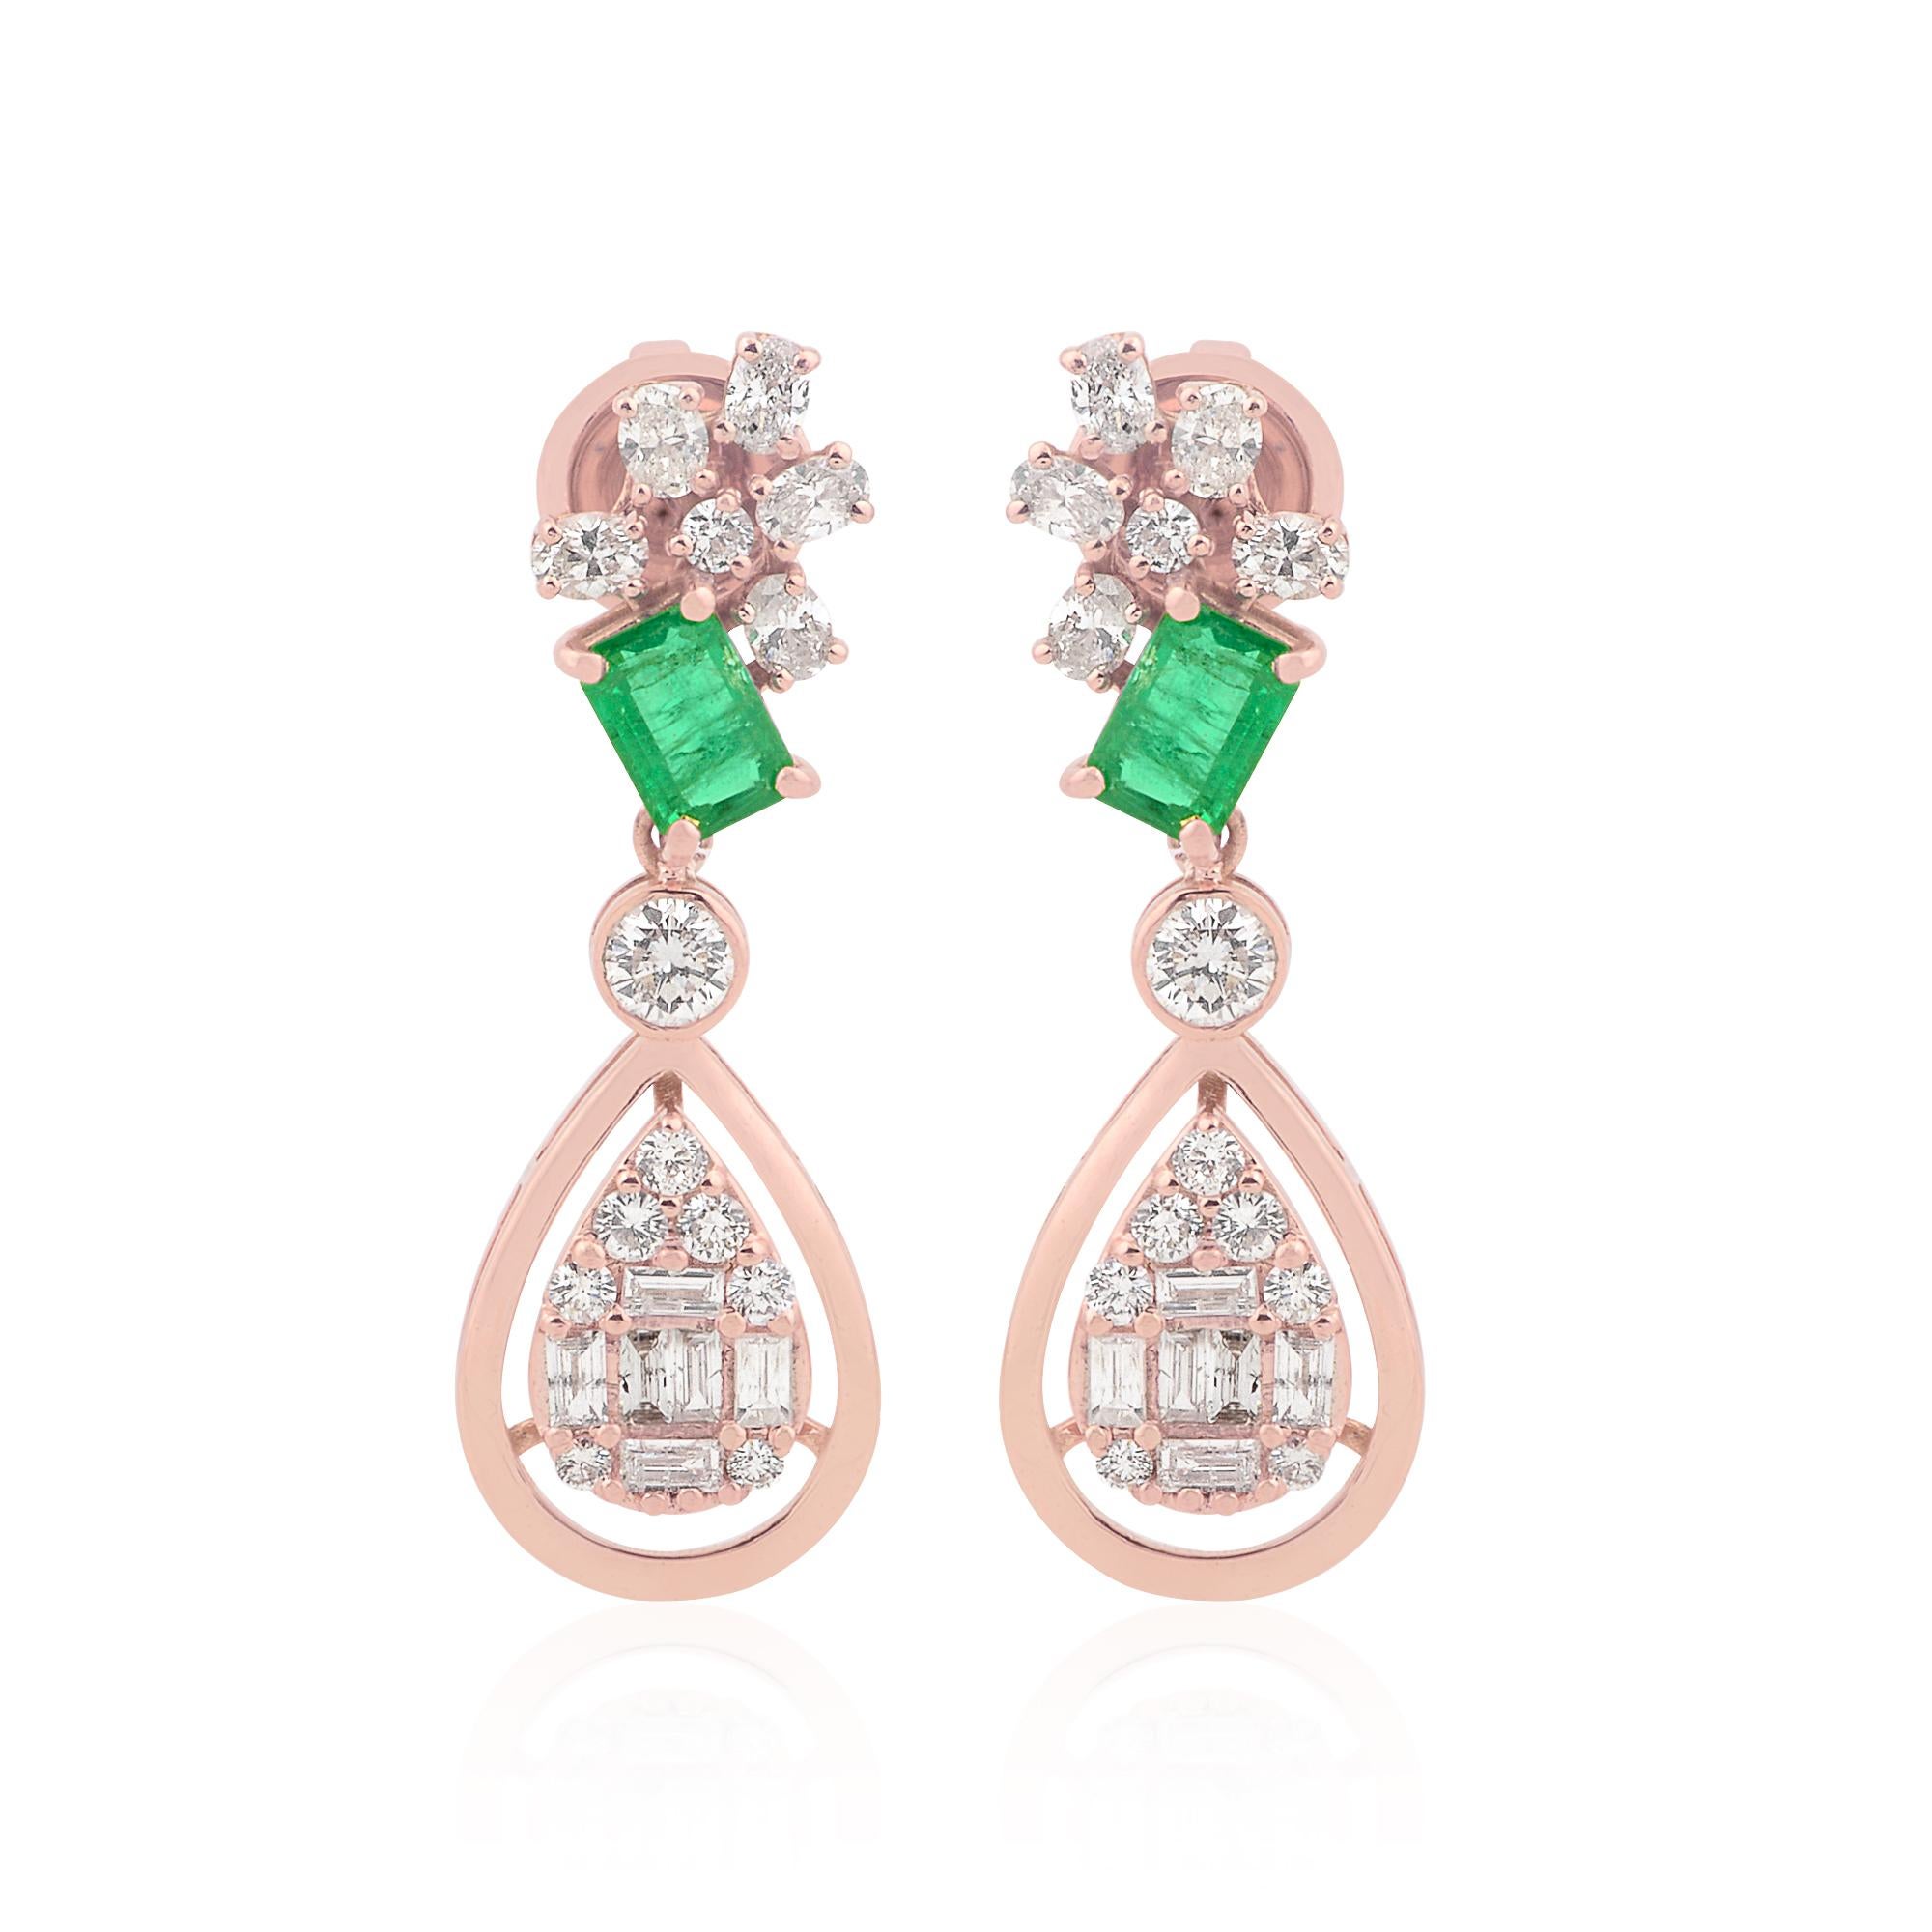 Item Code :- SEE-1814
Gross Wet :- 6.34 gm
18k Rose Gold Wet :- 5.83 gm
Diamond Wet :- 1.60 ct  ( AVERAGE DIAMOND CLARITY SI1-SI2 & COLOR H-I )
Emerald Wet :- 0.96 ct
Earrings Size :- 31x10 mm approx.
✦ Sizing
.....................
We can adjust